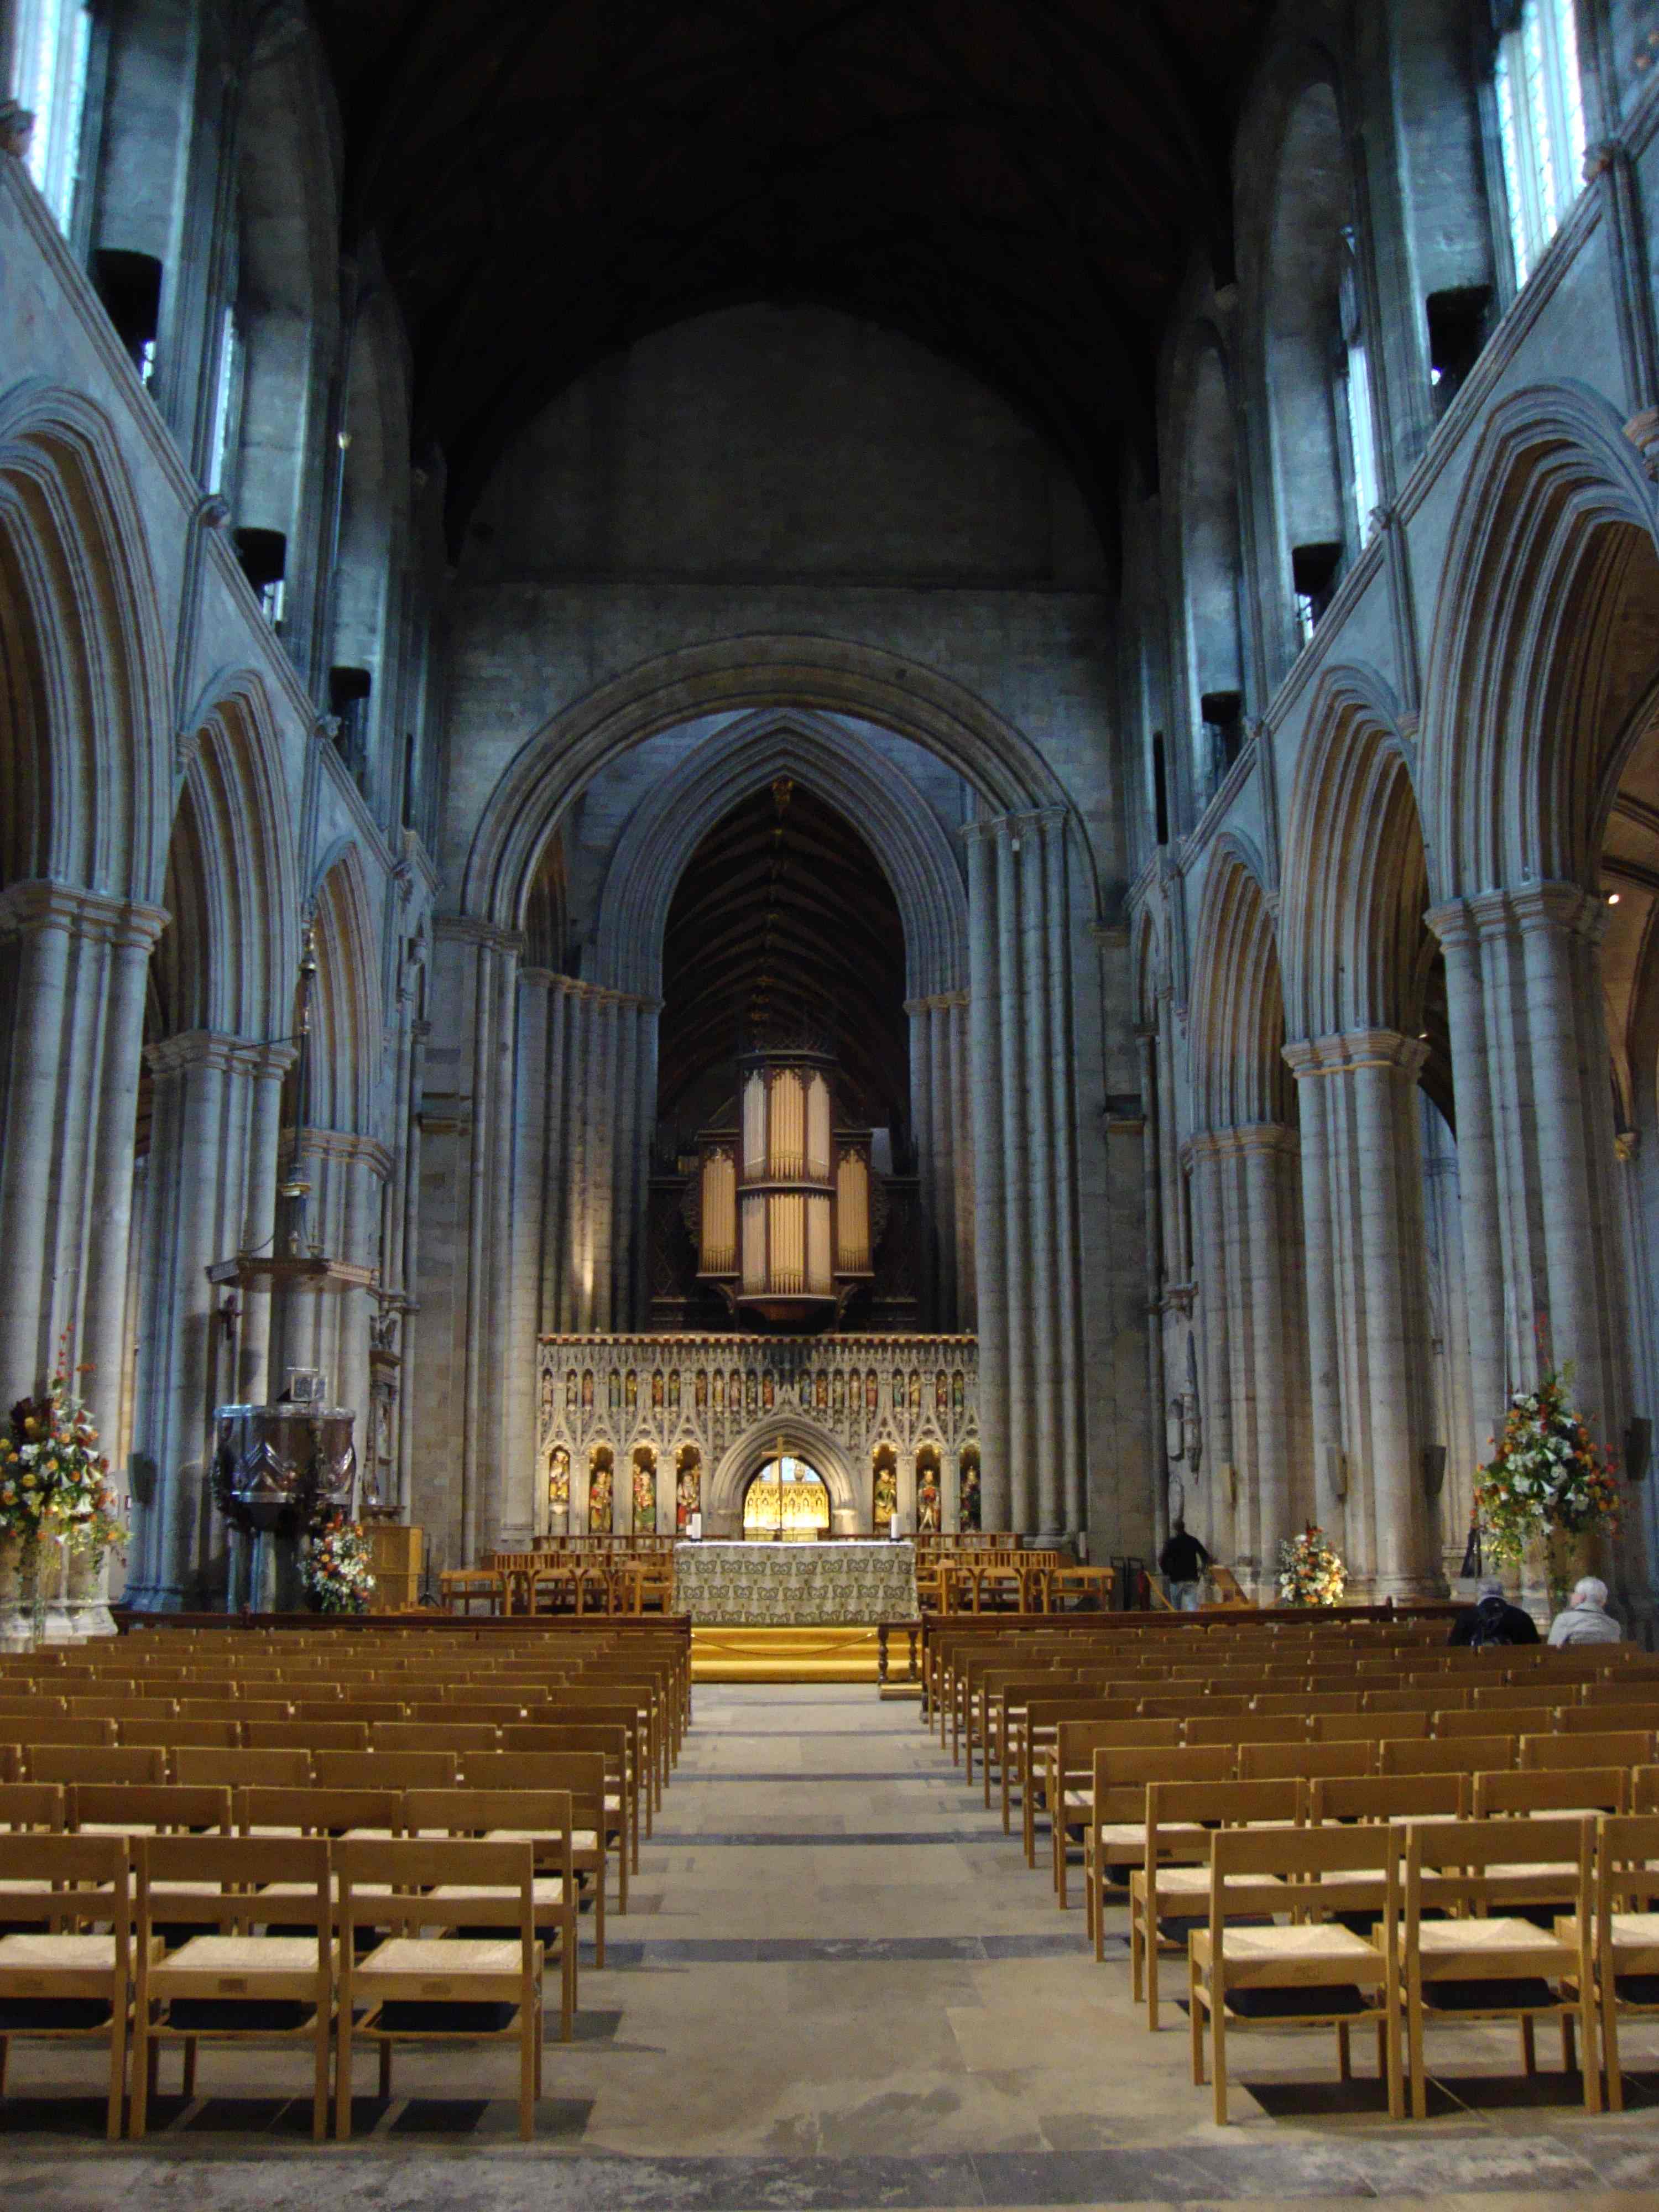 Amazing Ripon Cathedral Pictures & Backgrounds